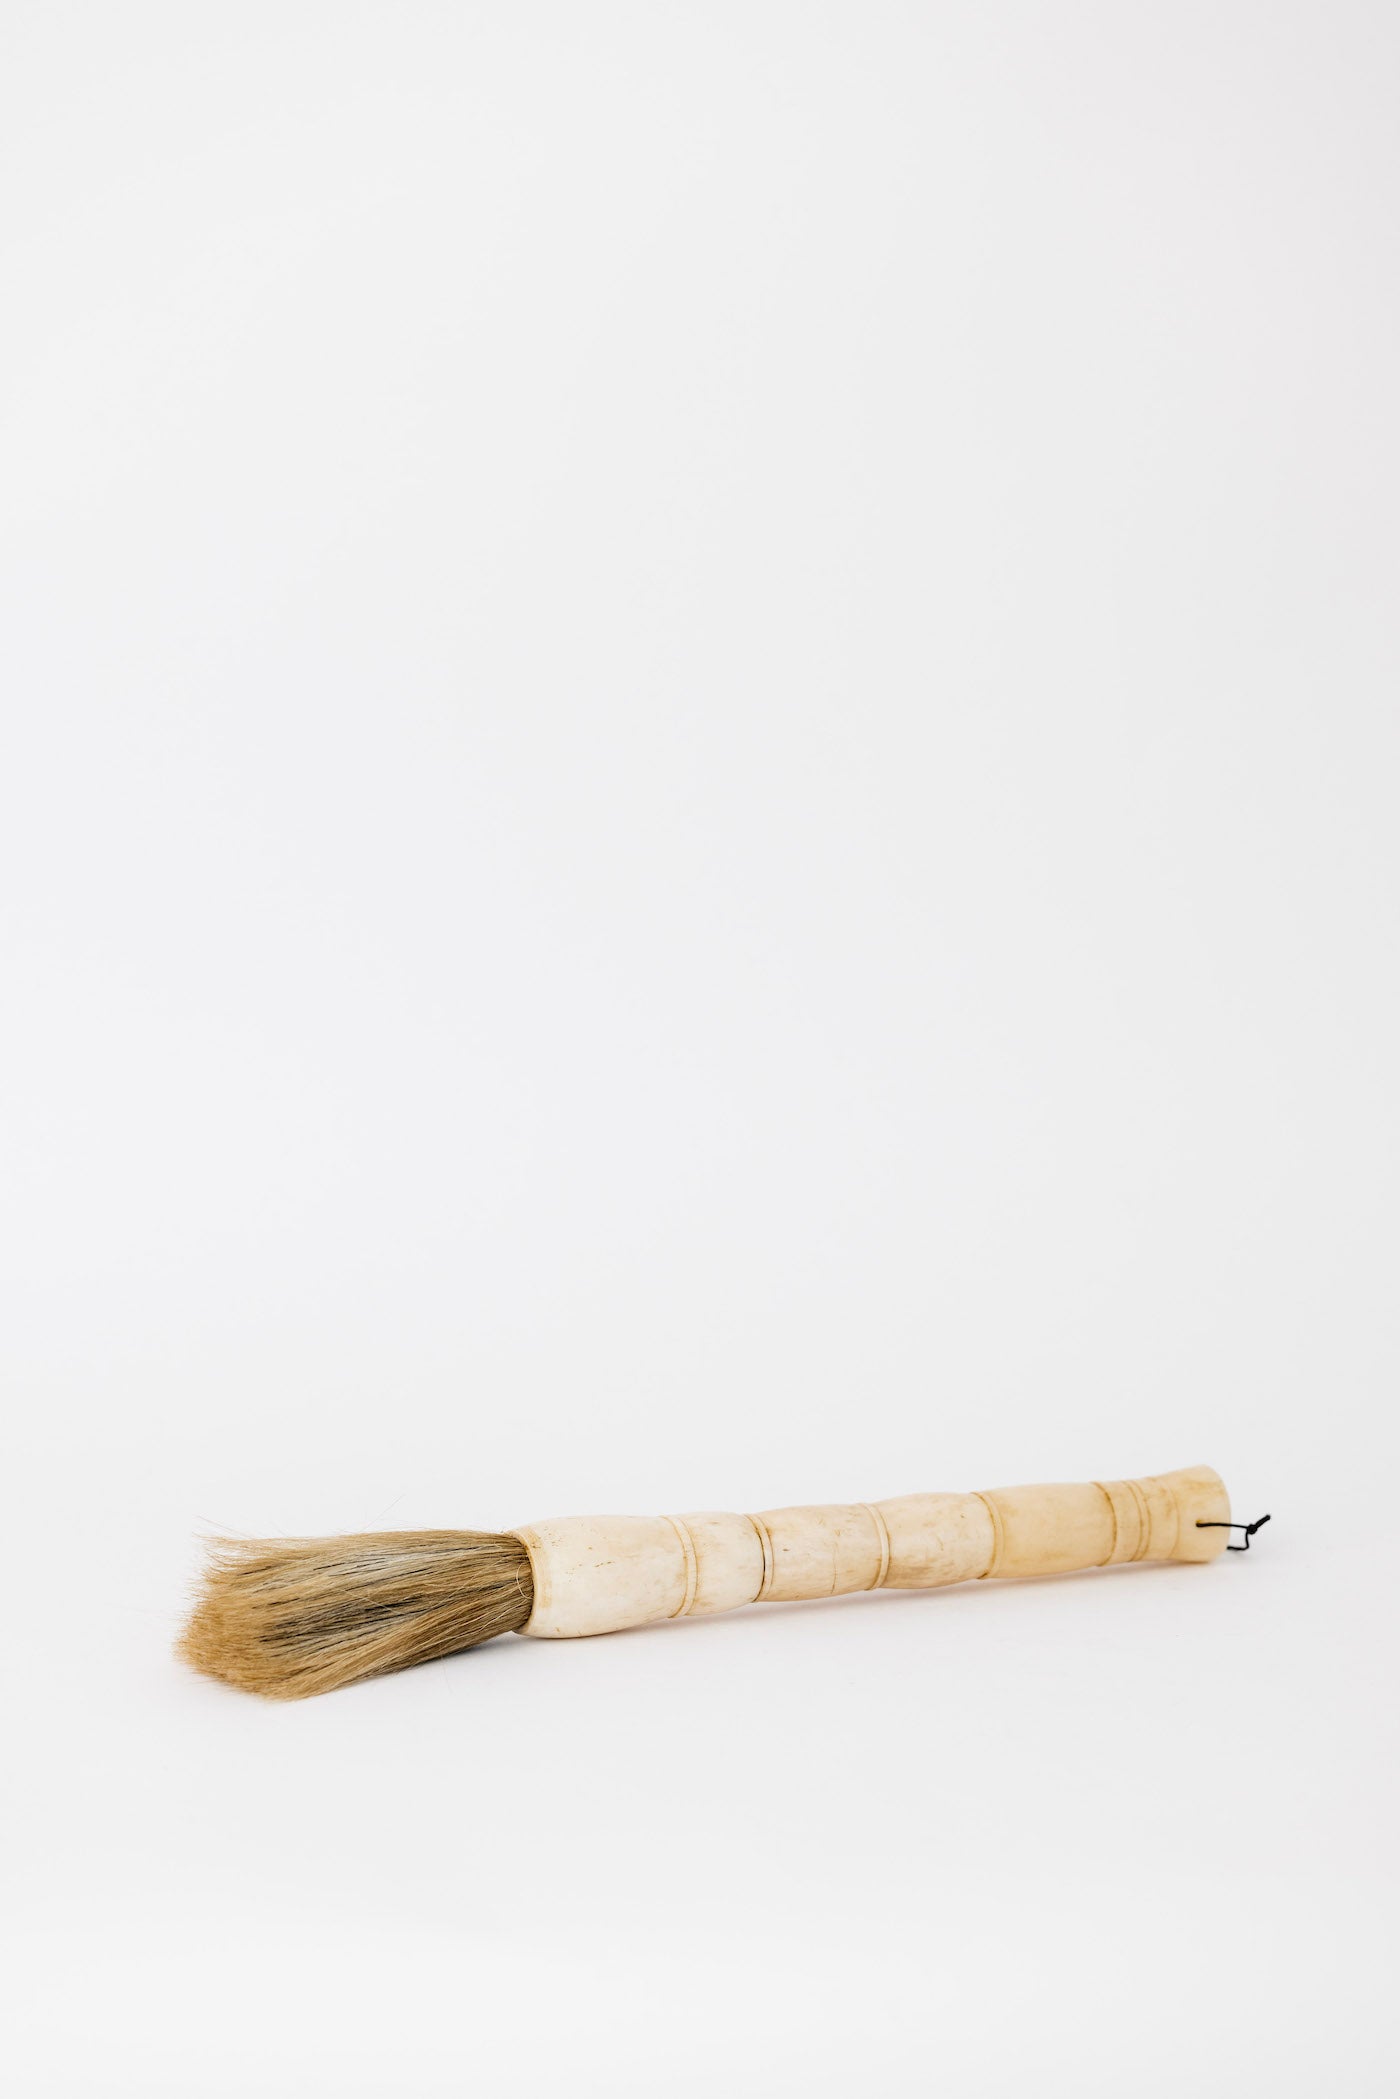 Imperial Calligraphy Brush - Ivory